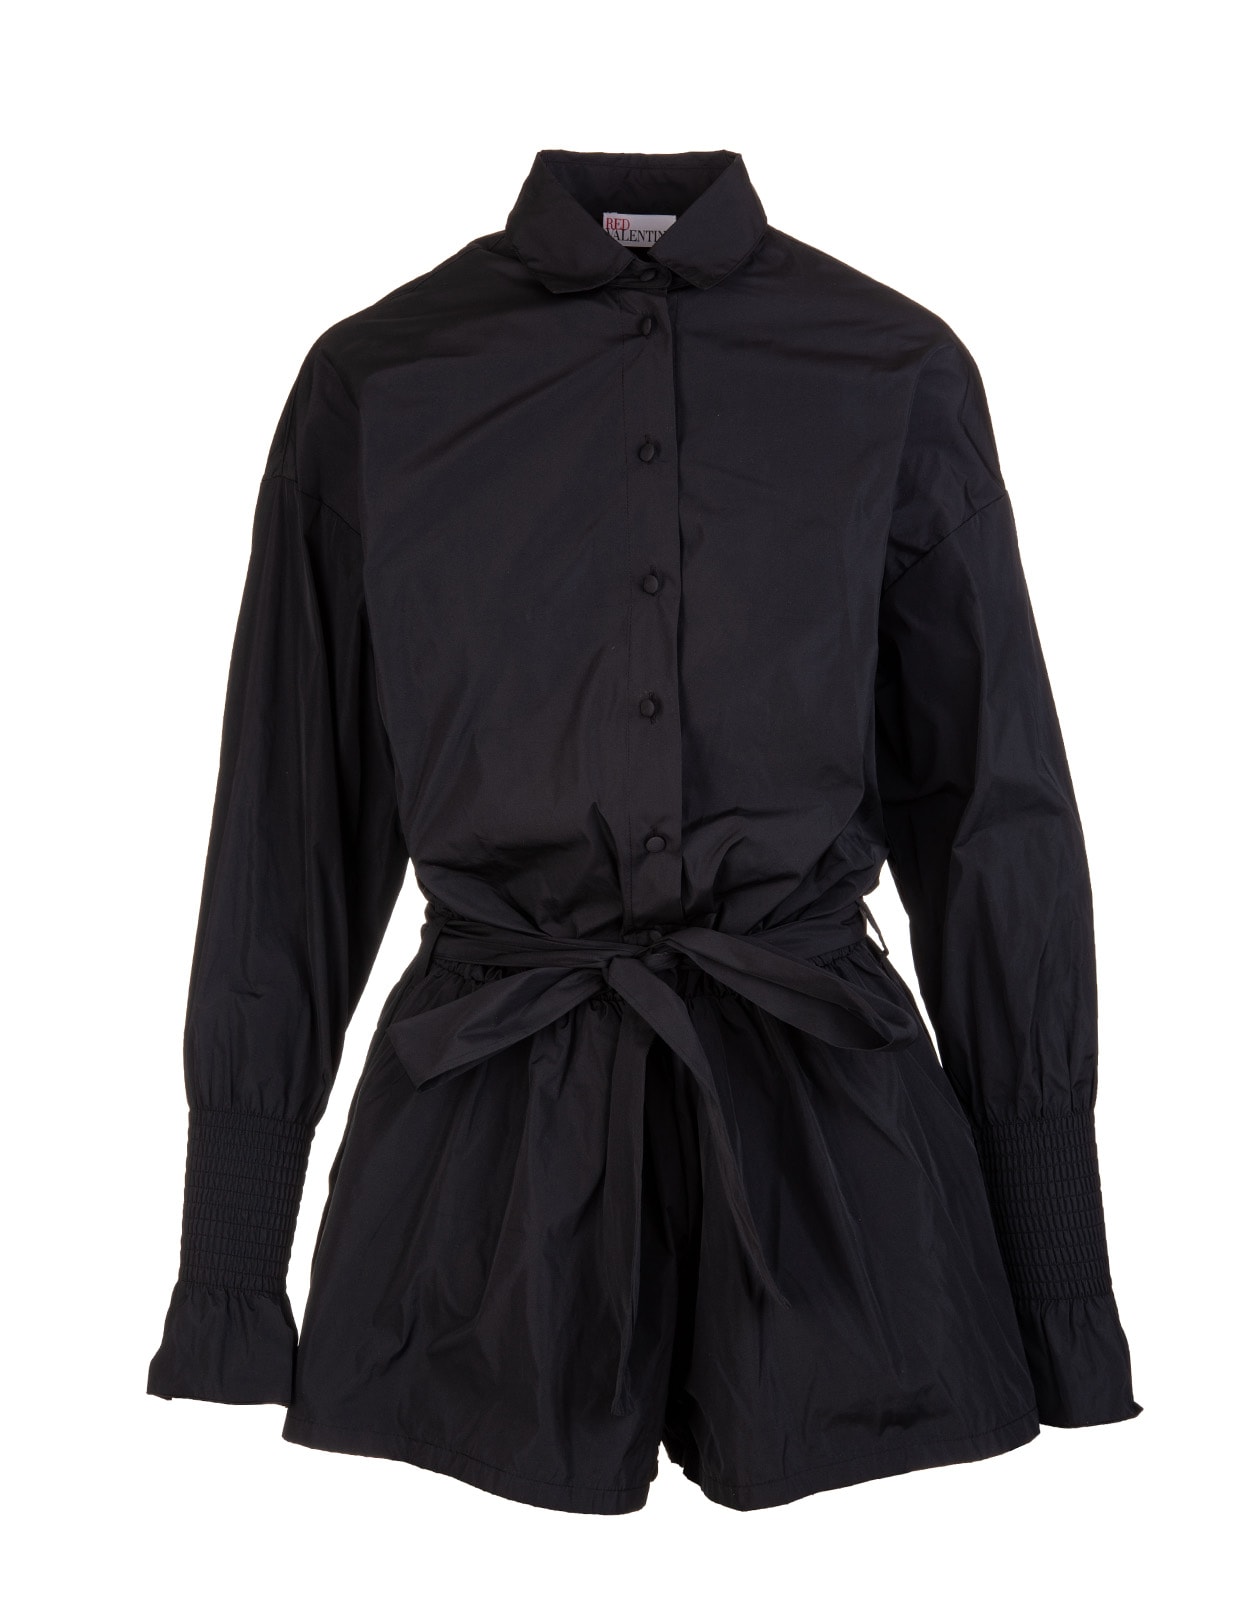 RED Valentino Short Black Shirt Jumpsuit With Bow